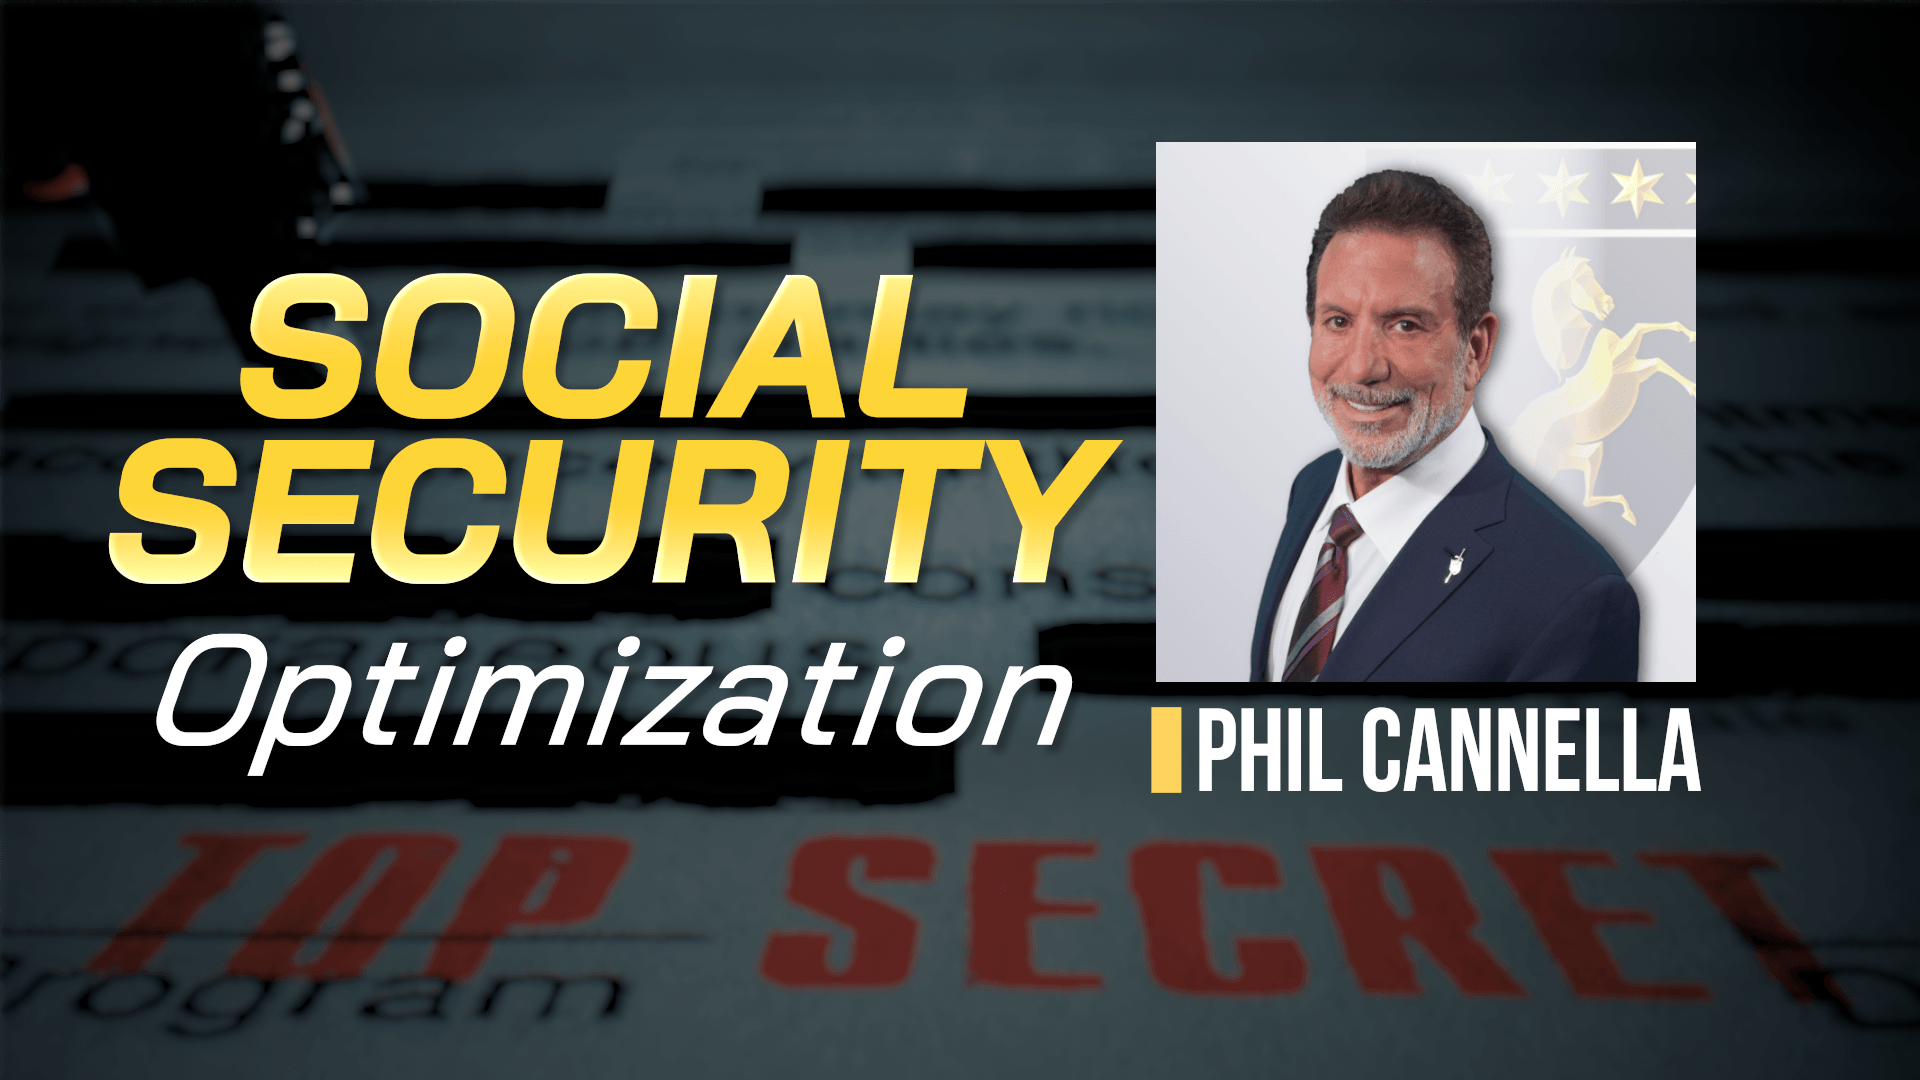 Top Secret Series: Before You Start Collecting Social Security, Watch This!